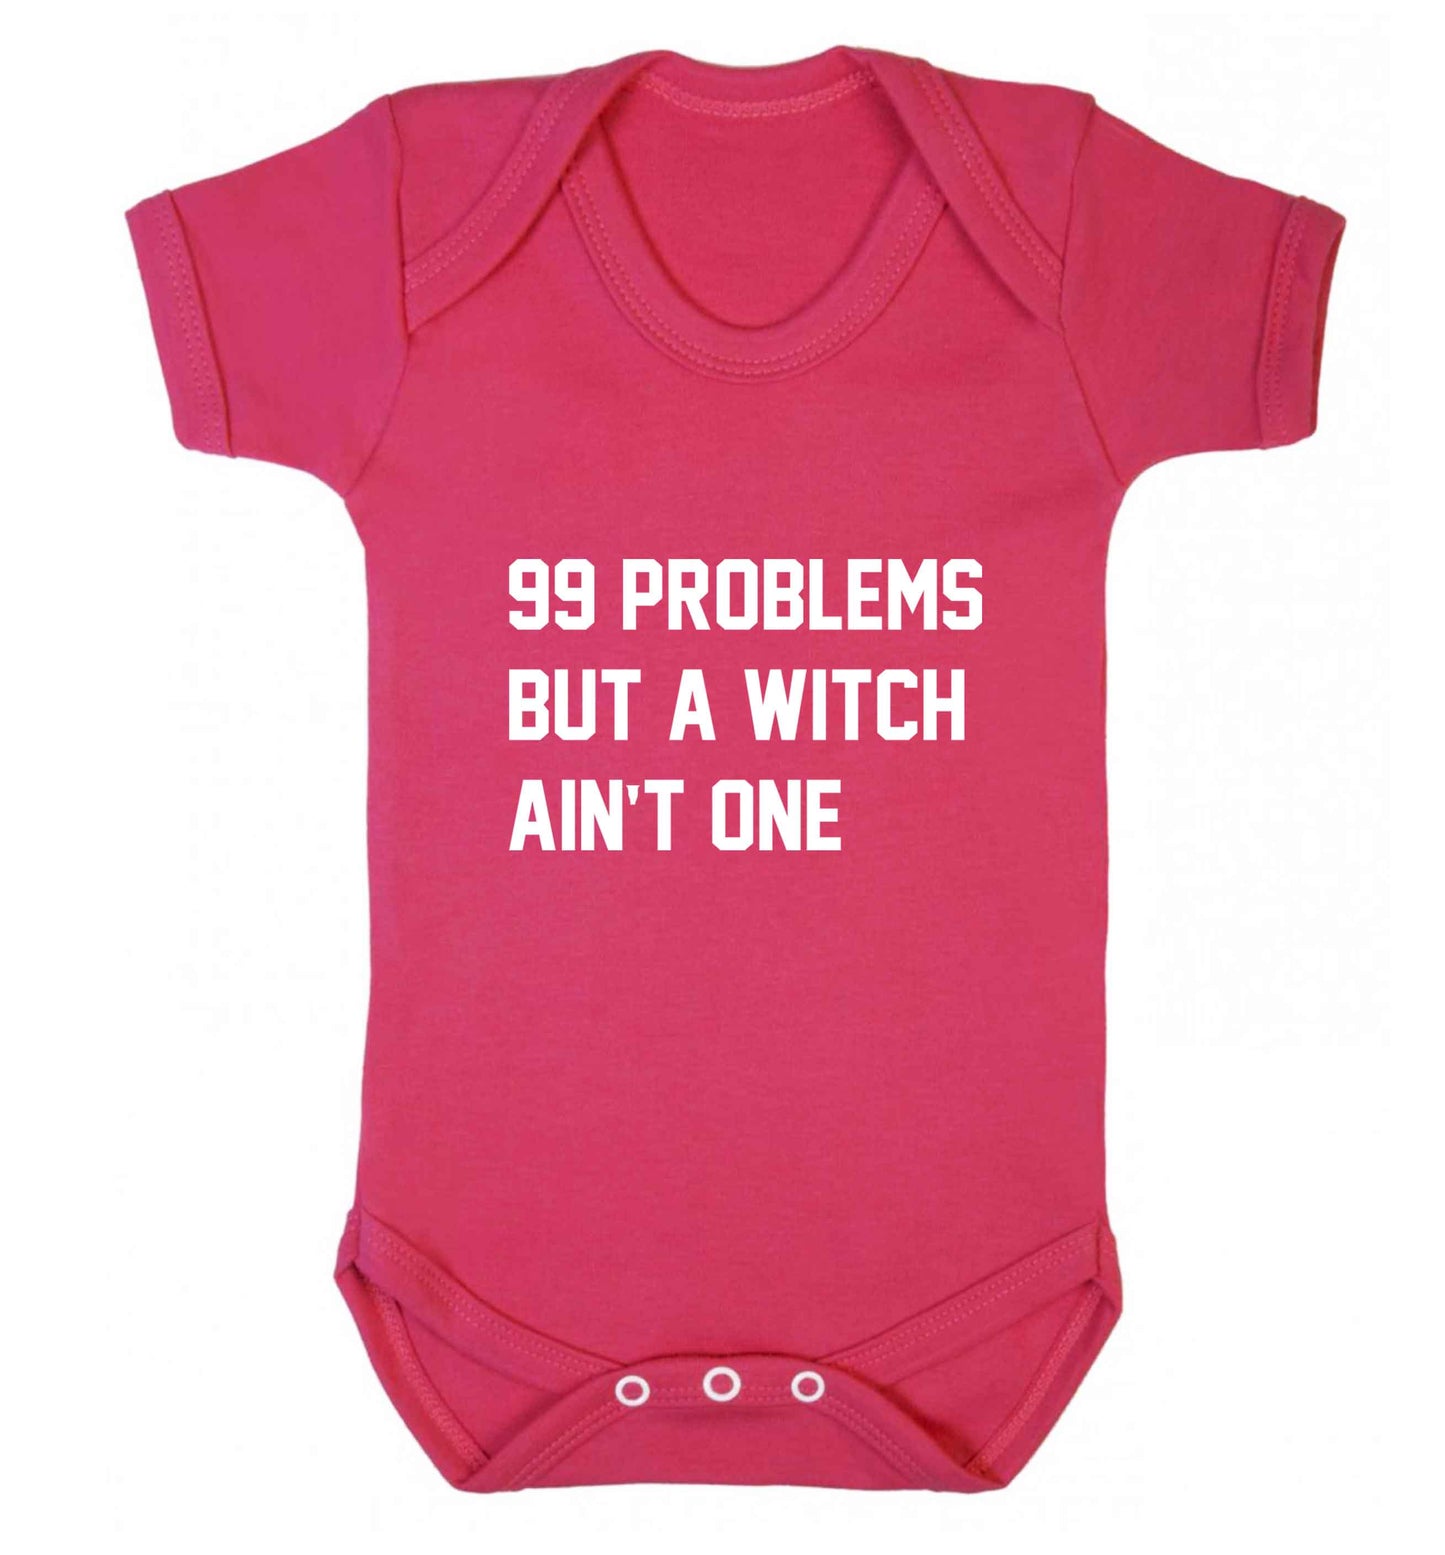 99 Problems but a witch aint one baby vest dark pink 18-24 months